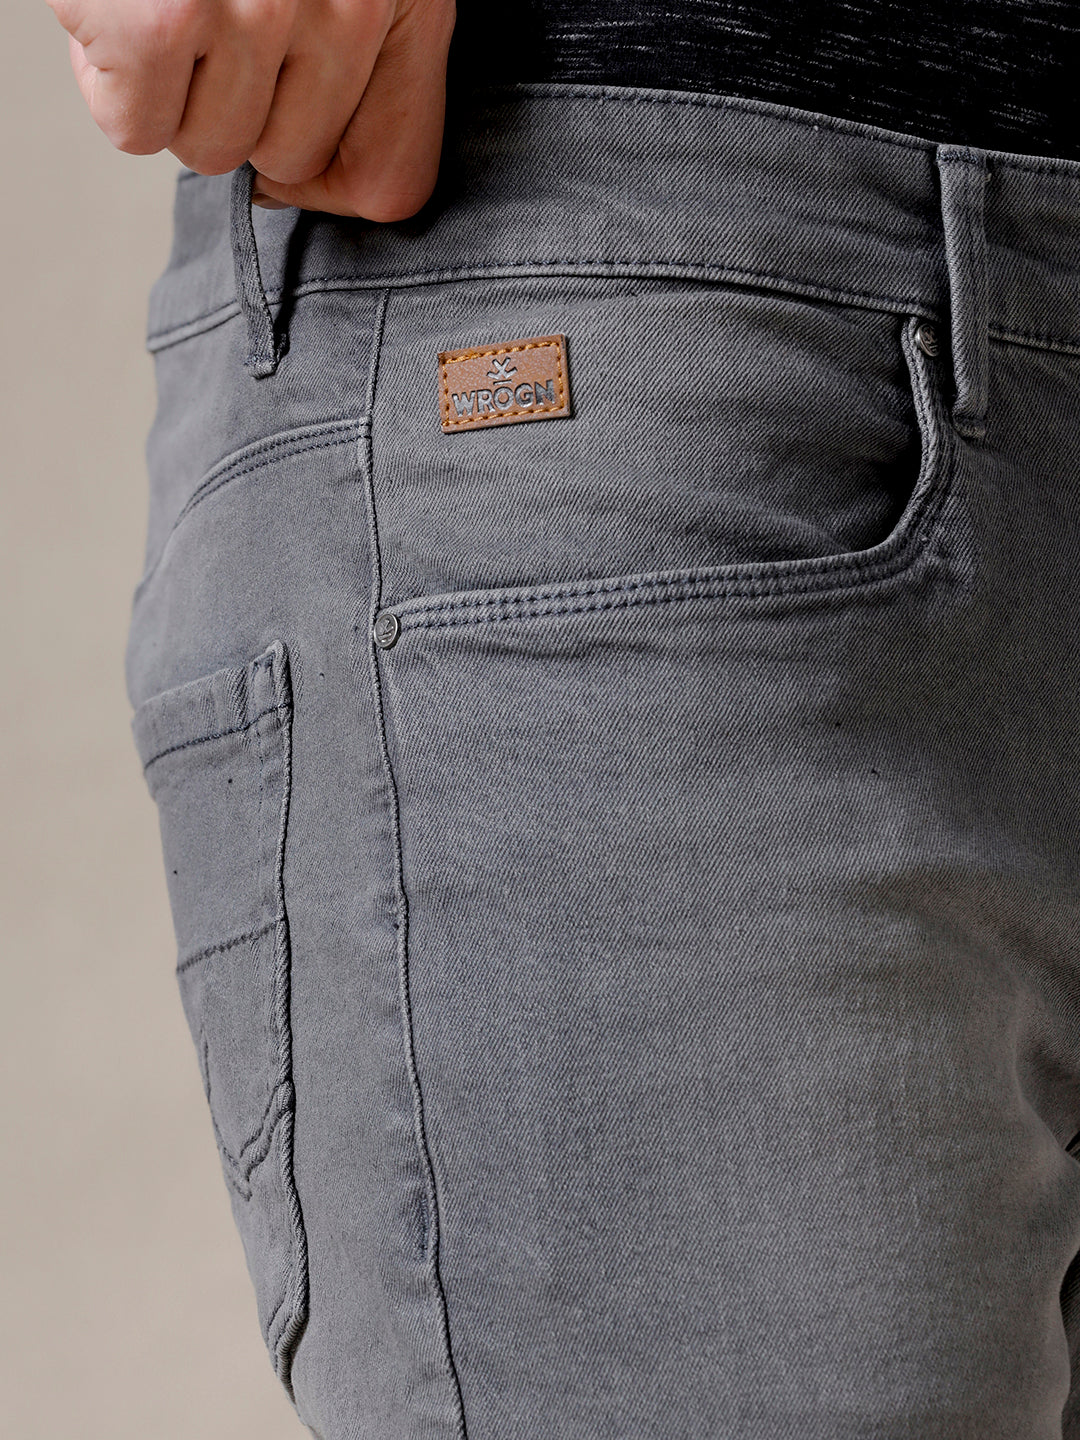 Faded Grey Rugged Jeans